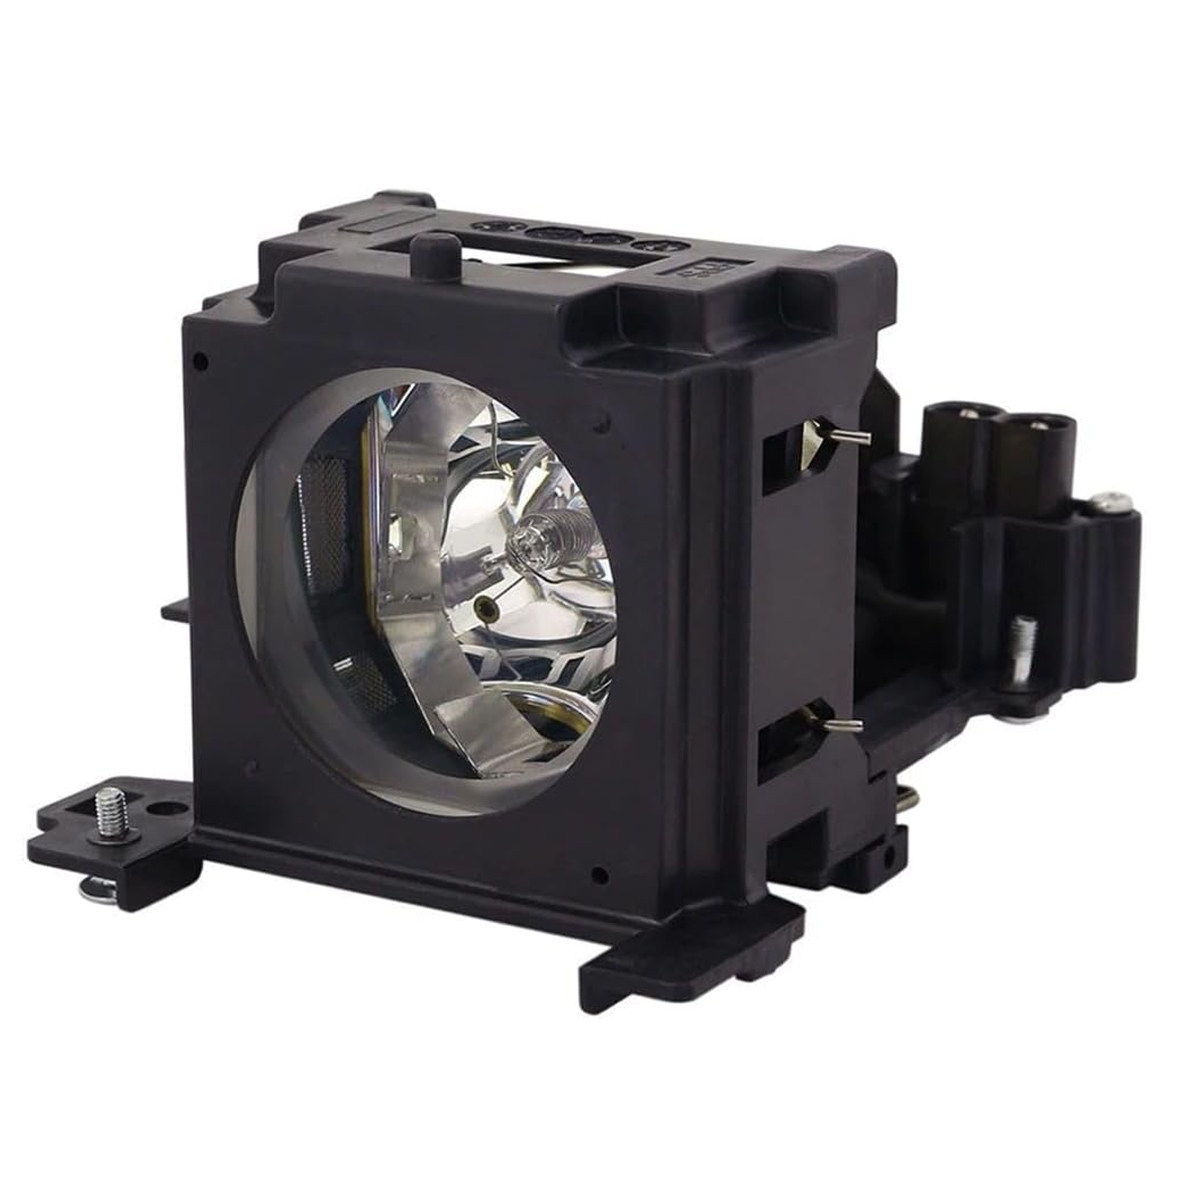 Replacement Projector lamp 78-6969-9875-2 For 3M CL60X X62 X62w